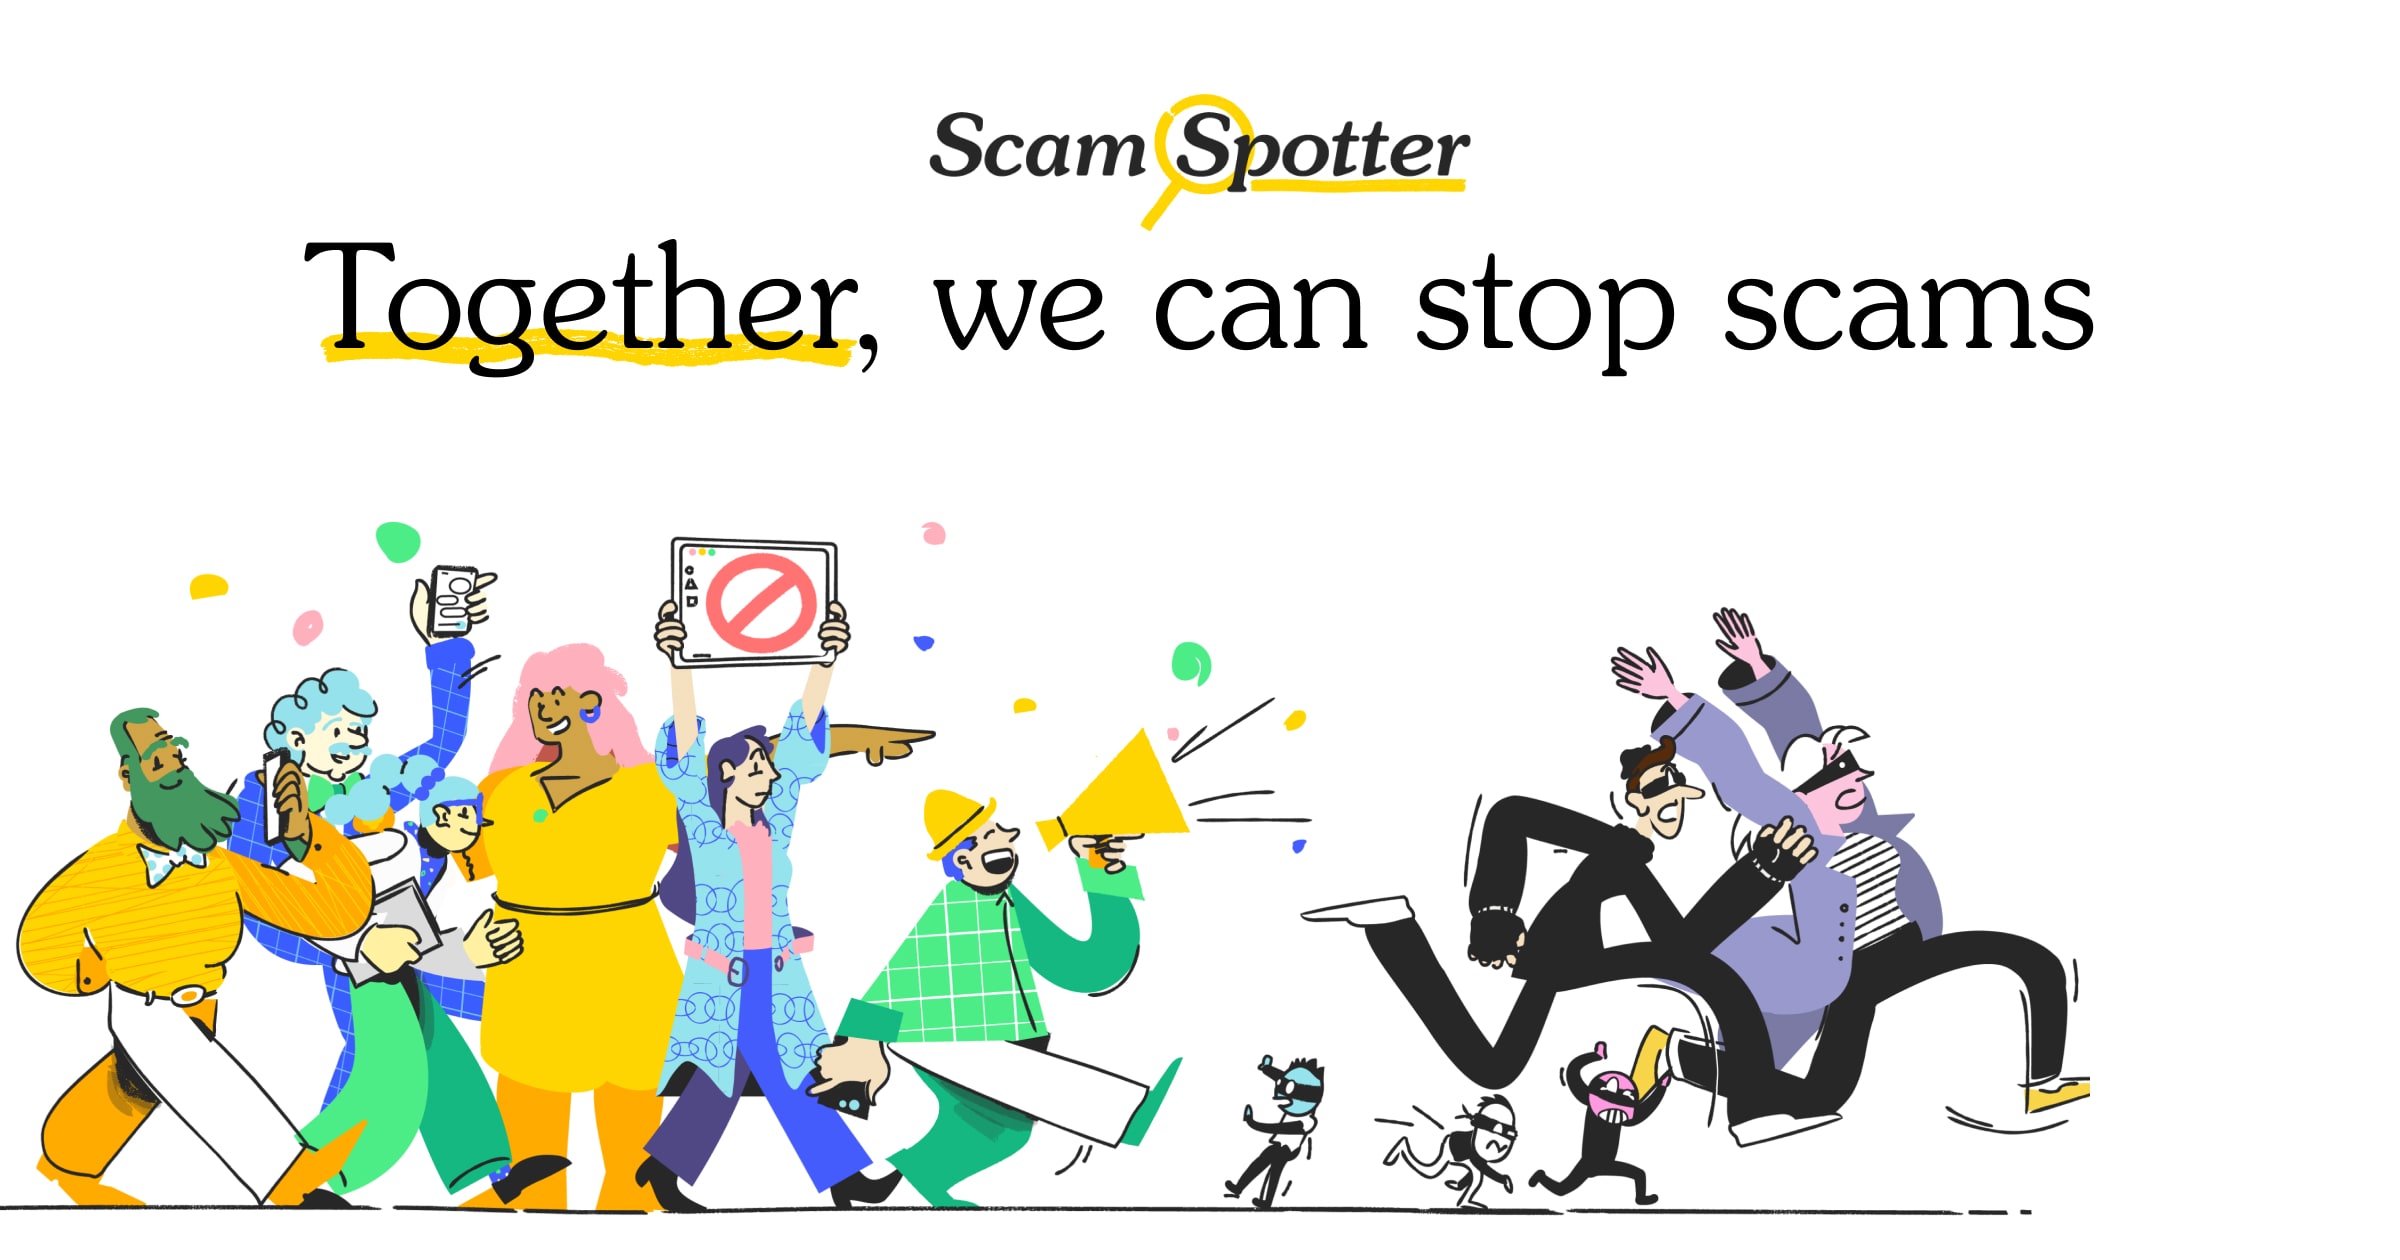 www.scamspotter.org